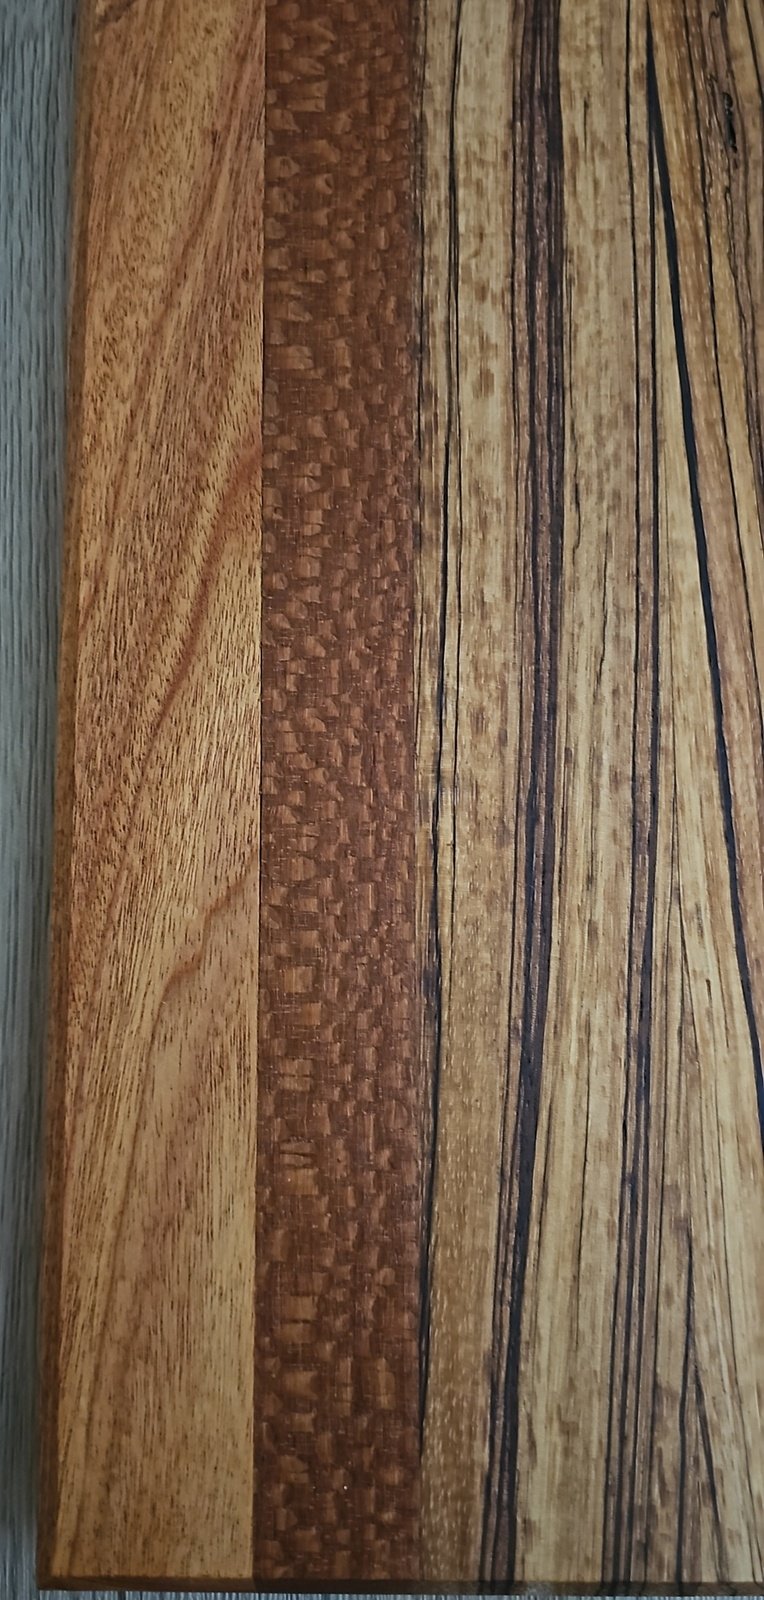 Lacy, Zebra, and Canary Charcuterie Boards/Serving Board/Cutting Board